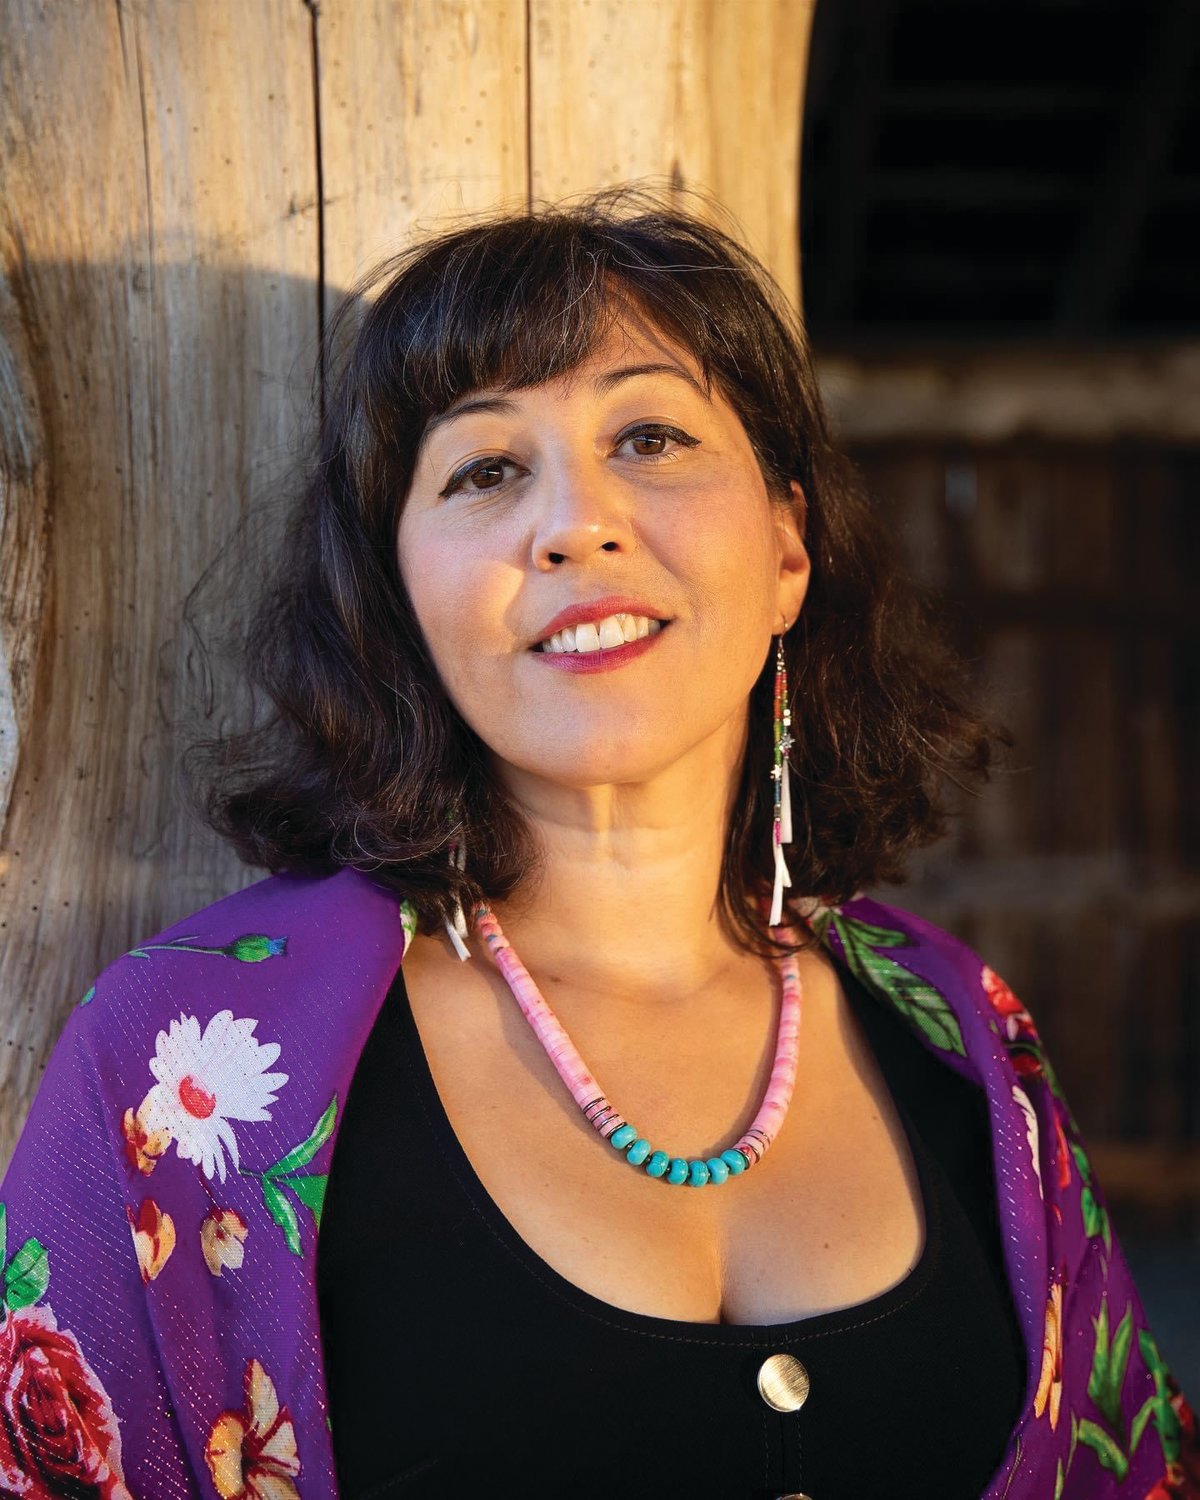 Rena Priest is the first Indigenous person to hold the role of Washington State Poet Laureate.